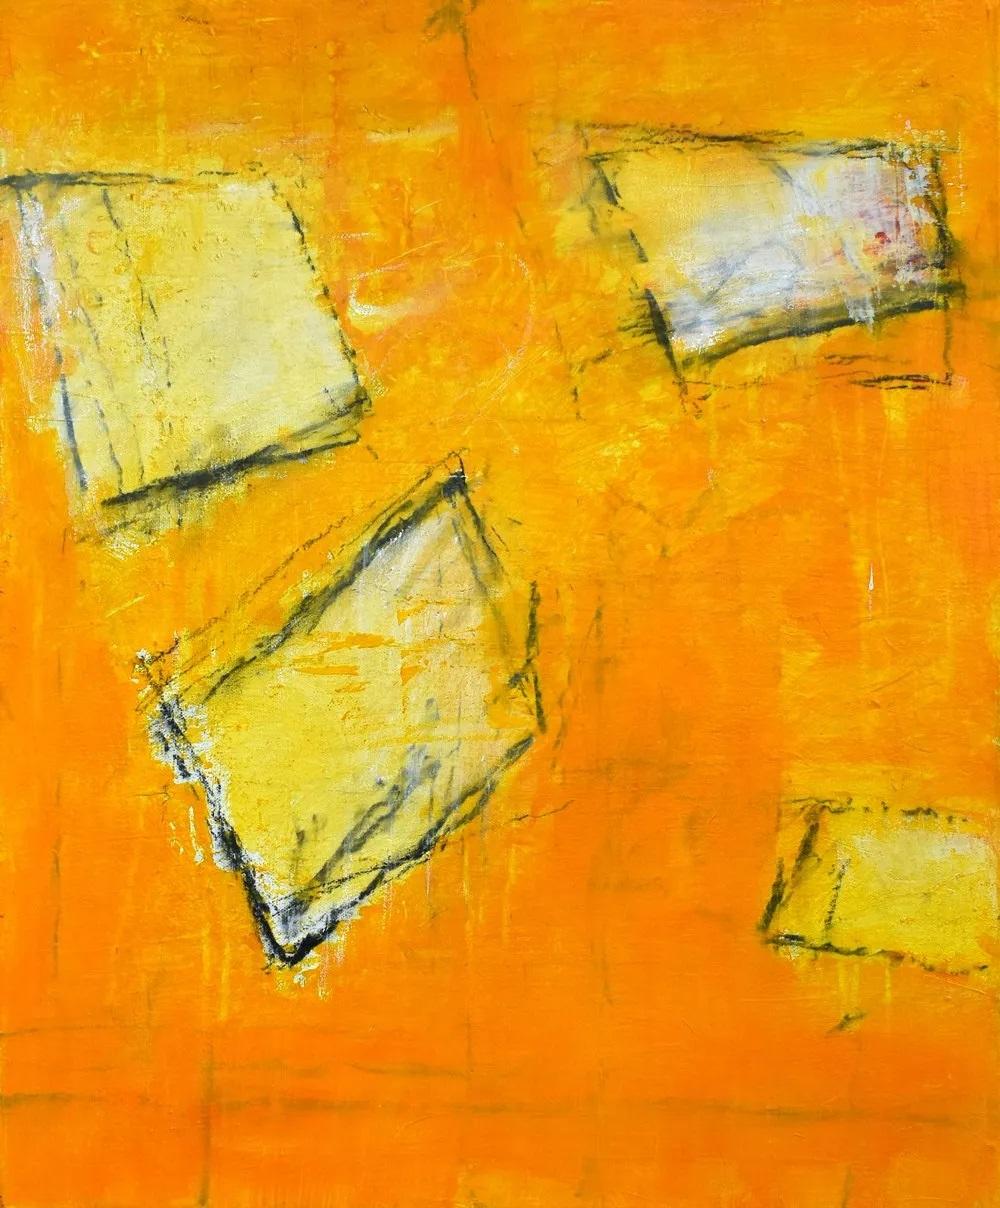 Tony Magar Abstract Painting - "The Poem" Contemporary Orange and Yellow Toned Abstract Expressionist Painting